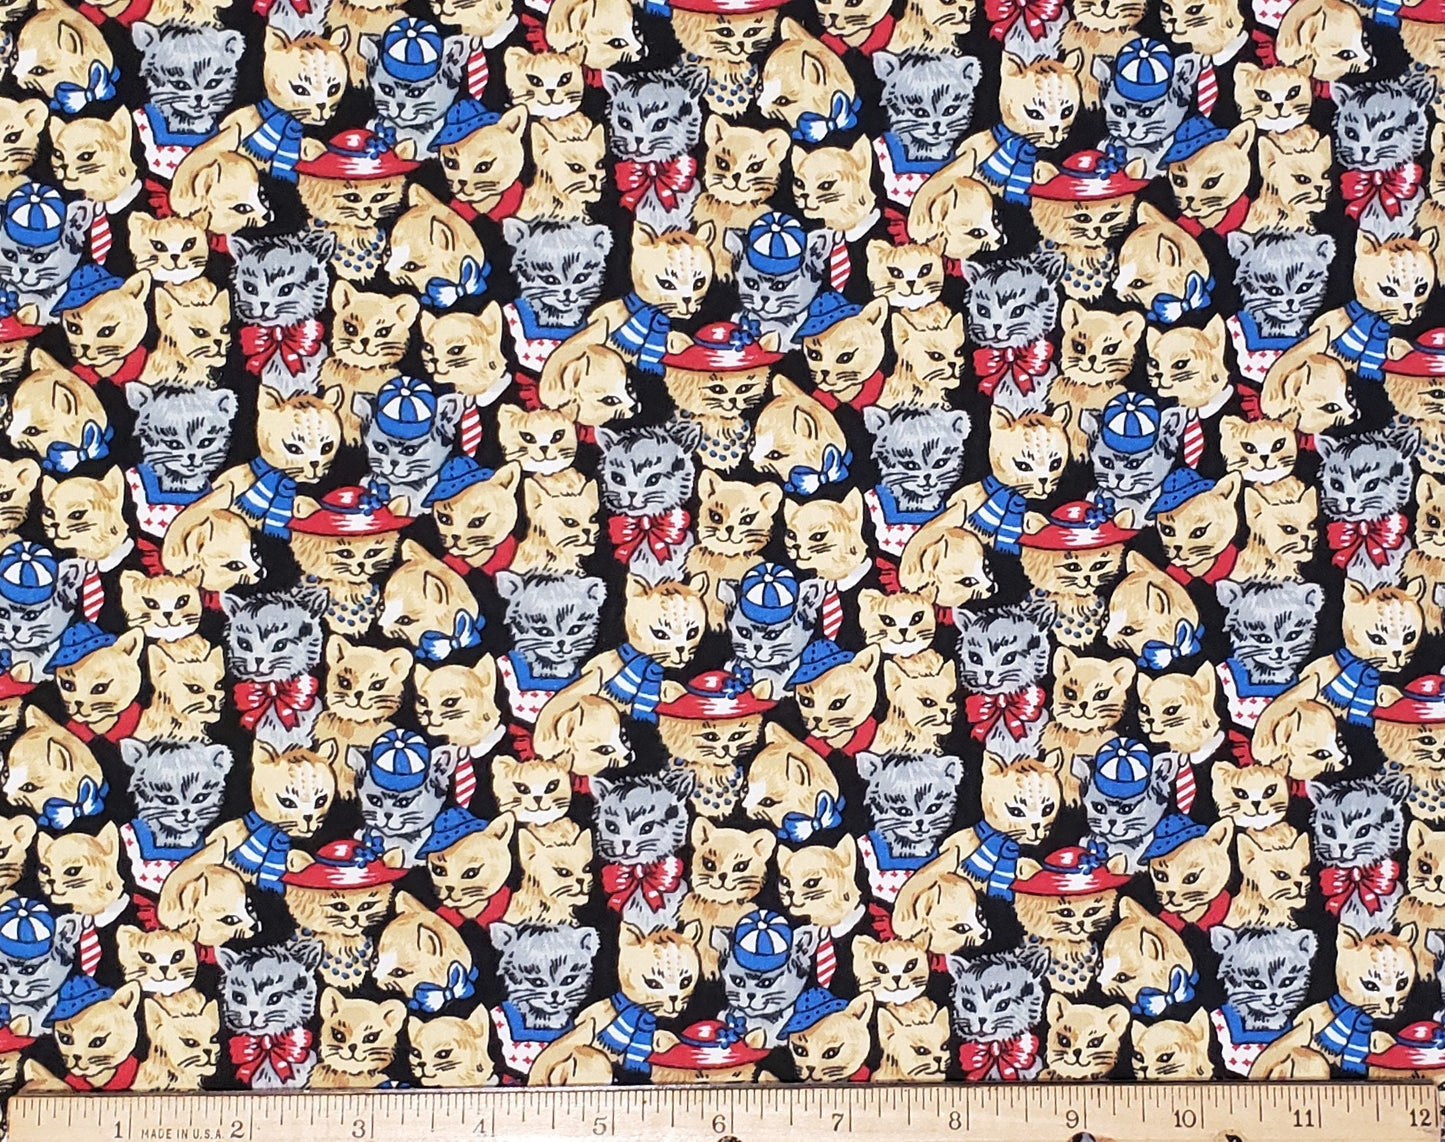 Critters by Fabri-Quilts, Inc. - Tan and Gray Cats in Blue and Red Clothes/Hats